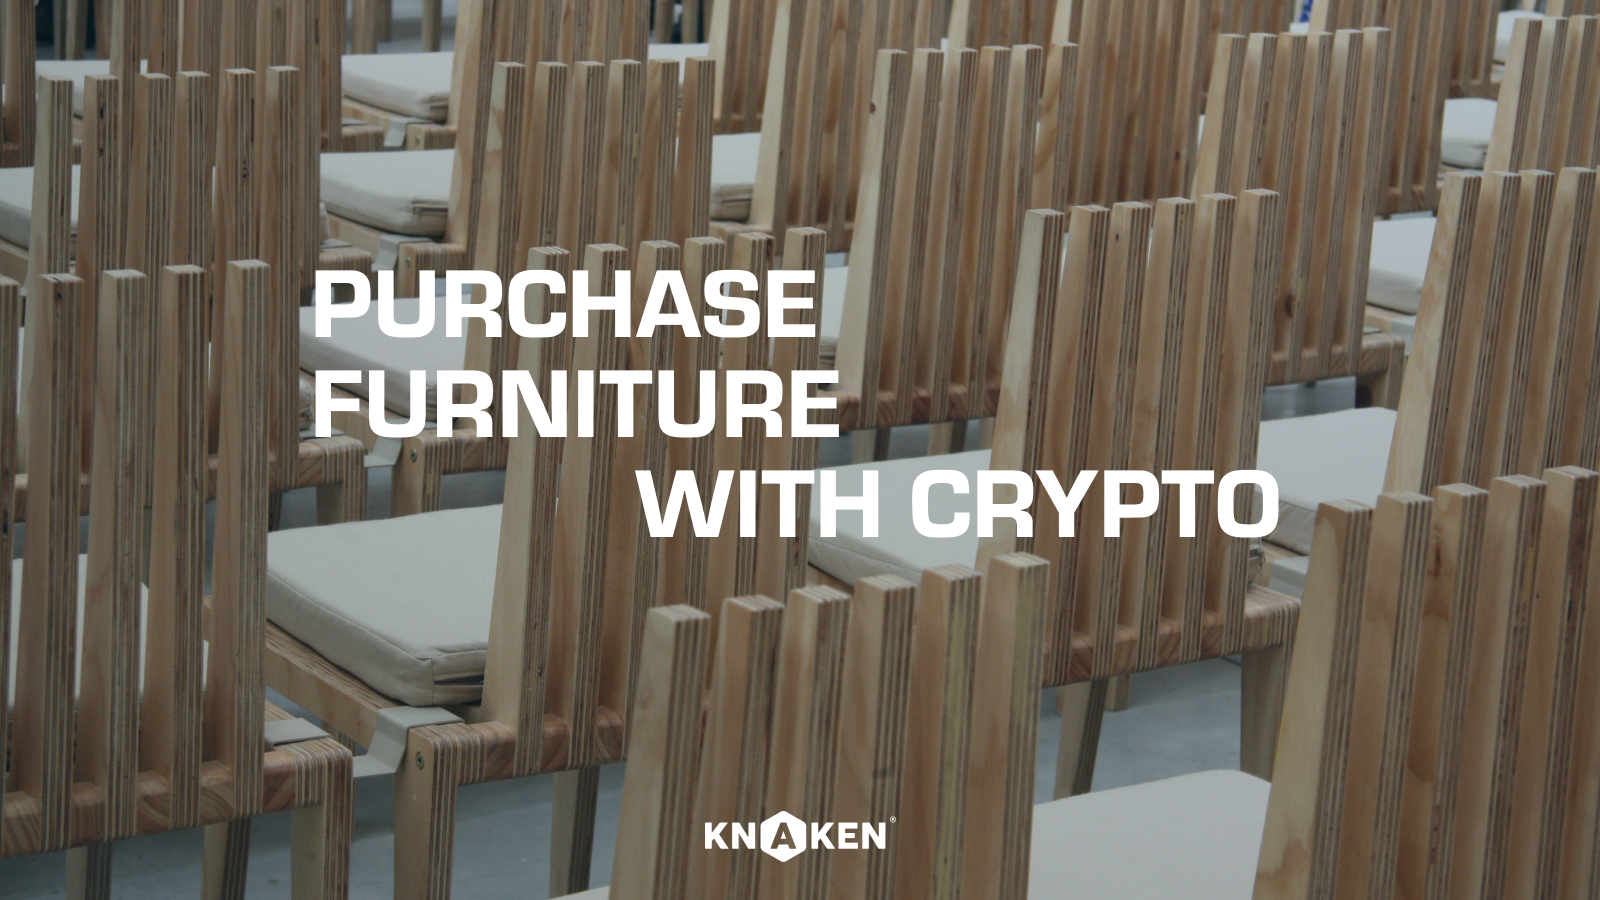 Purchasing furniture with crypto